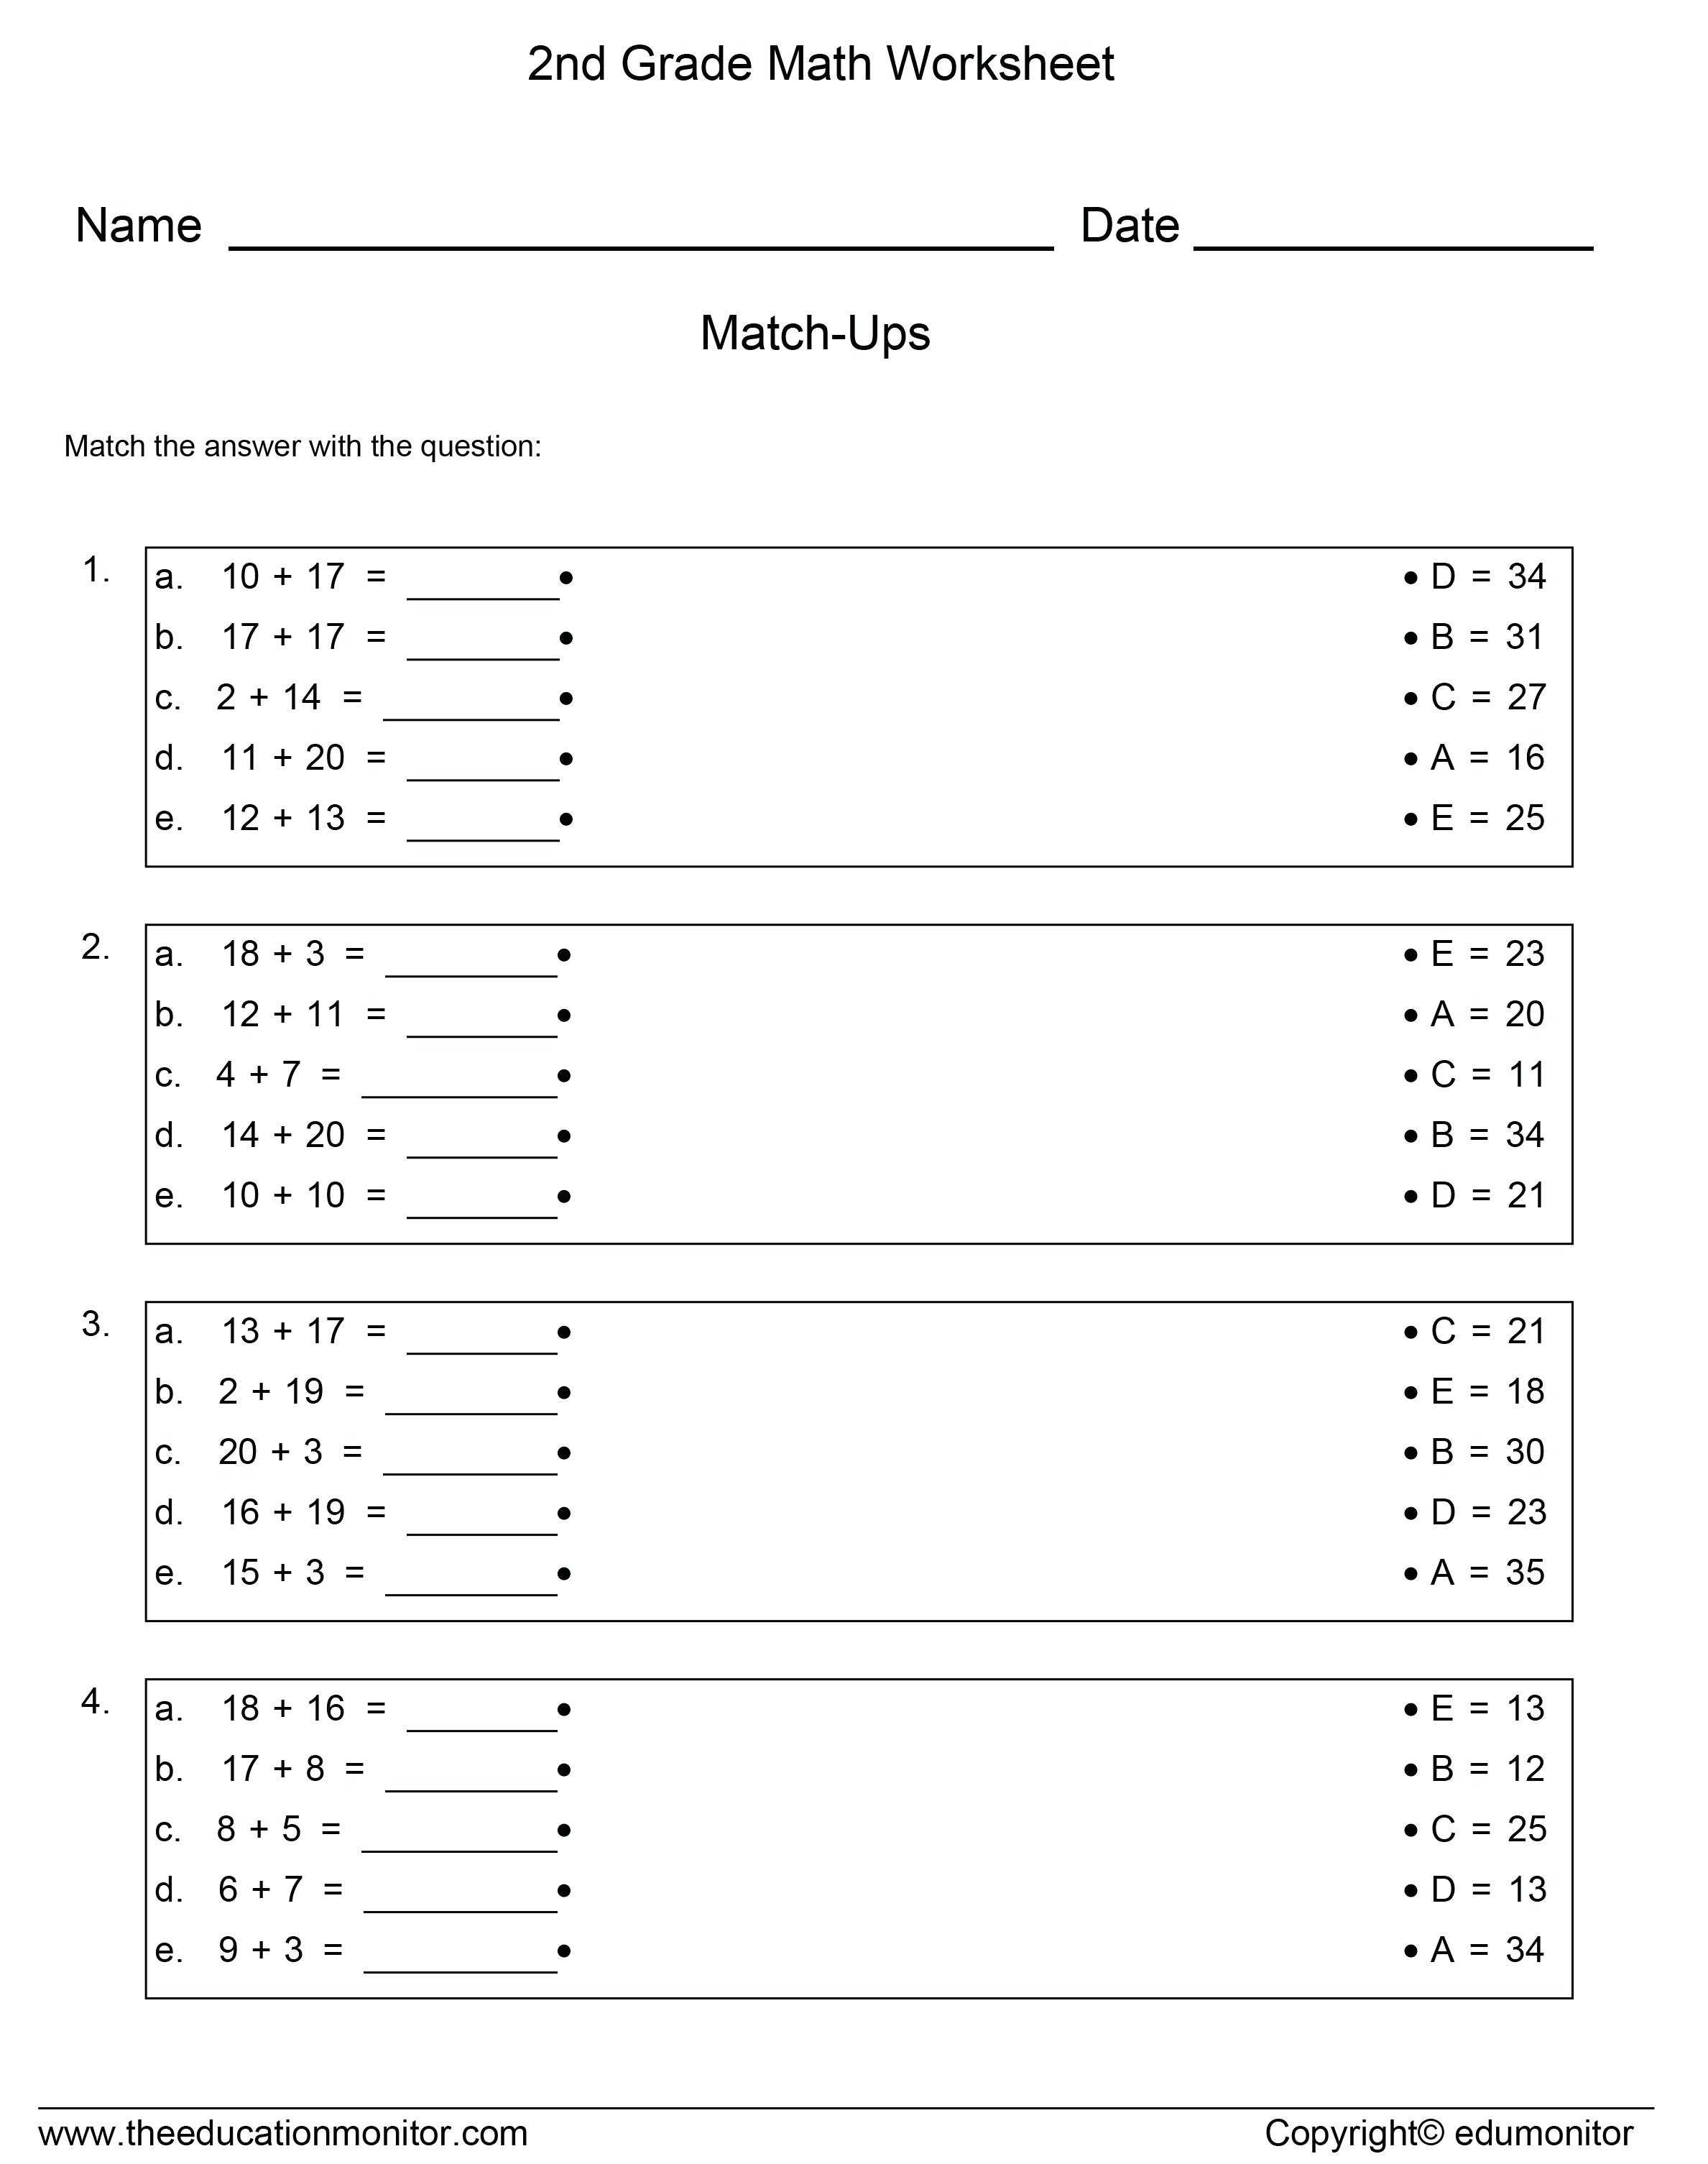 7th Grade Common Core Math Worksheets with Answer Key together with Free Worksheets Library Download and Print Worksheets